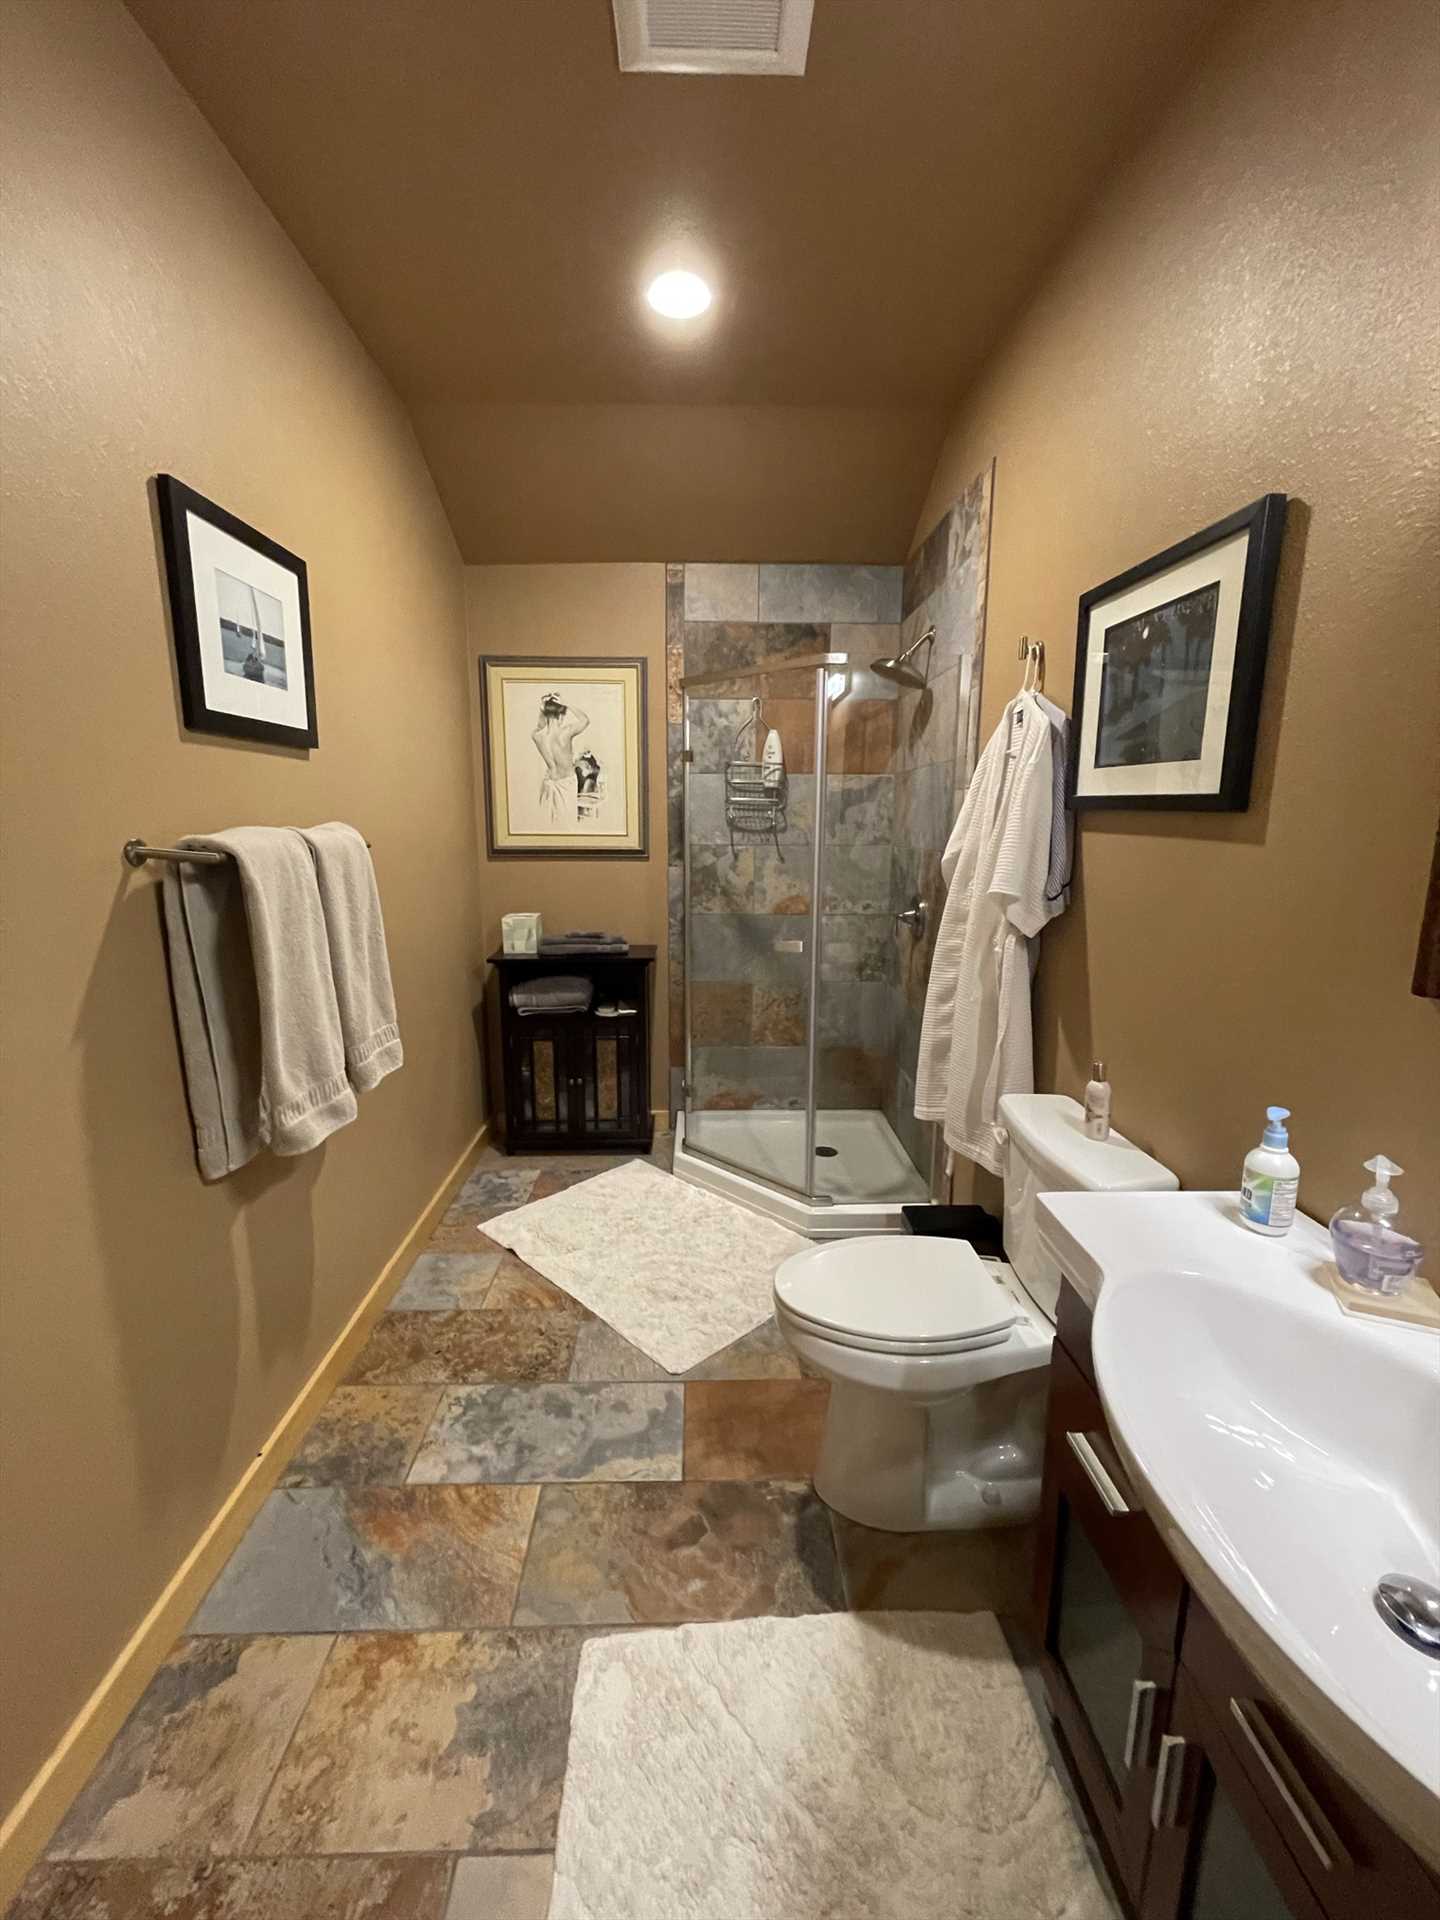                                                 A sparkling and unique shower stall welcomes you in the second bathroom-and fresh linens are included in both baths.